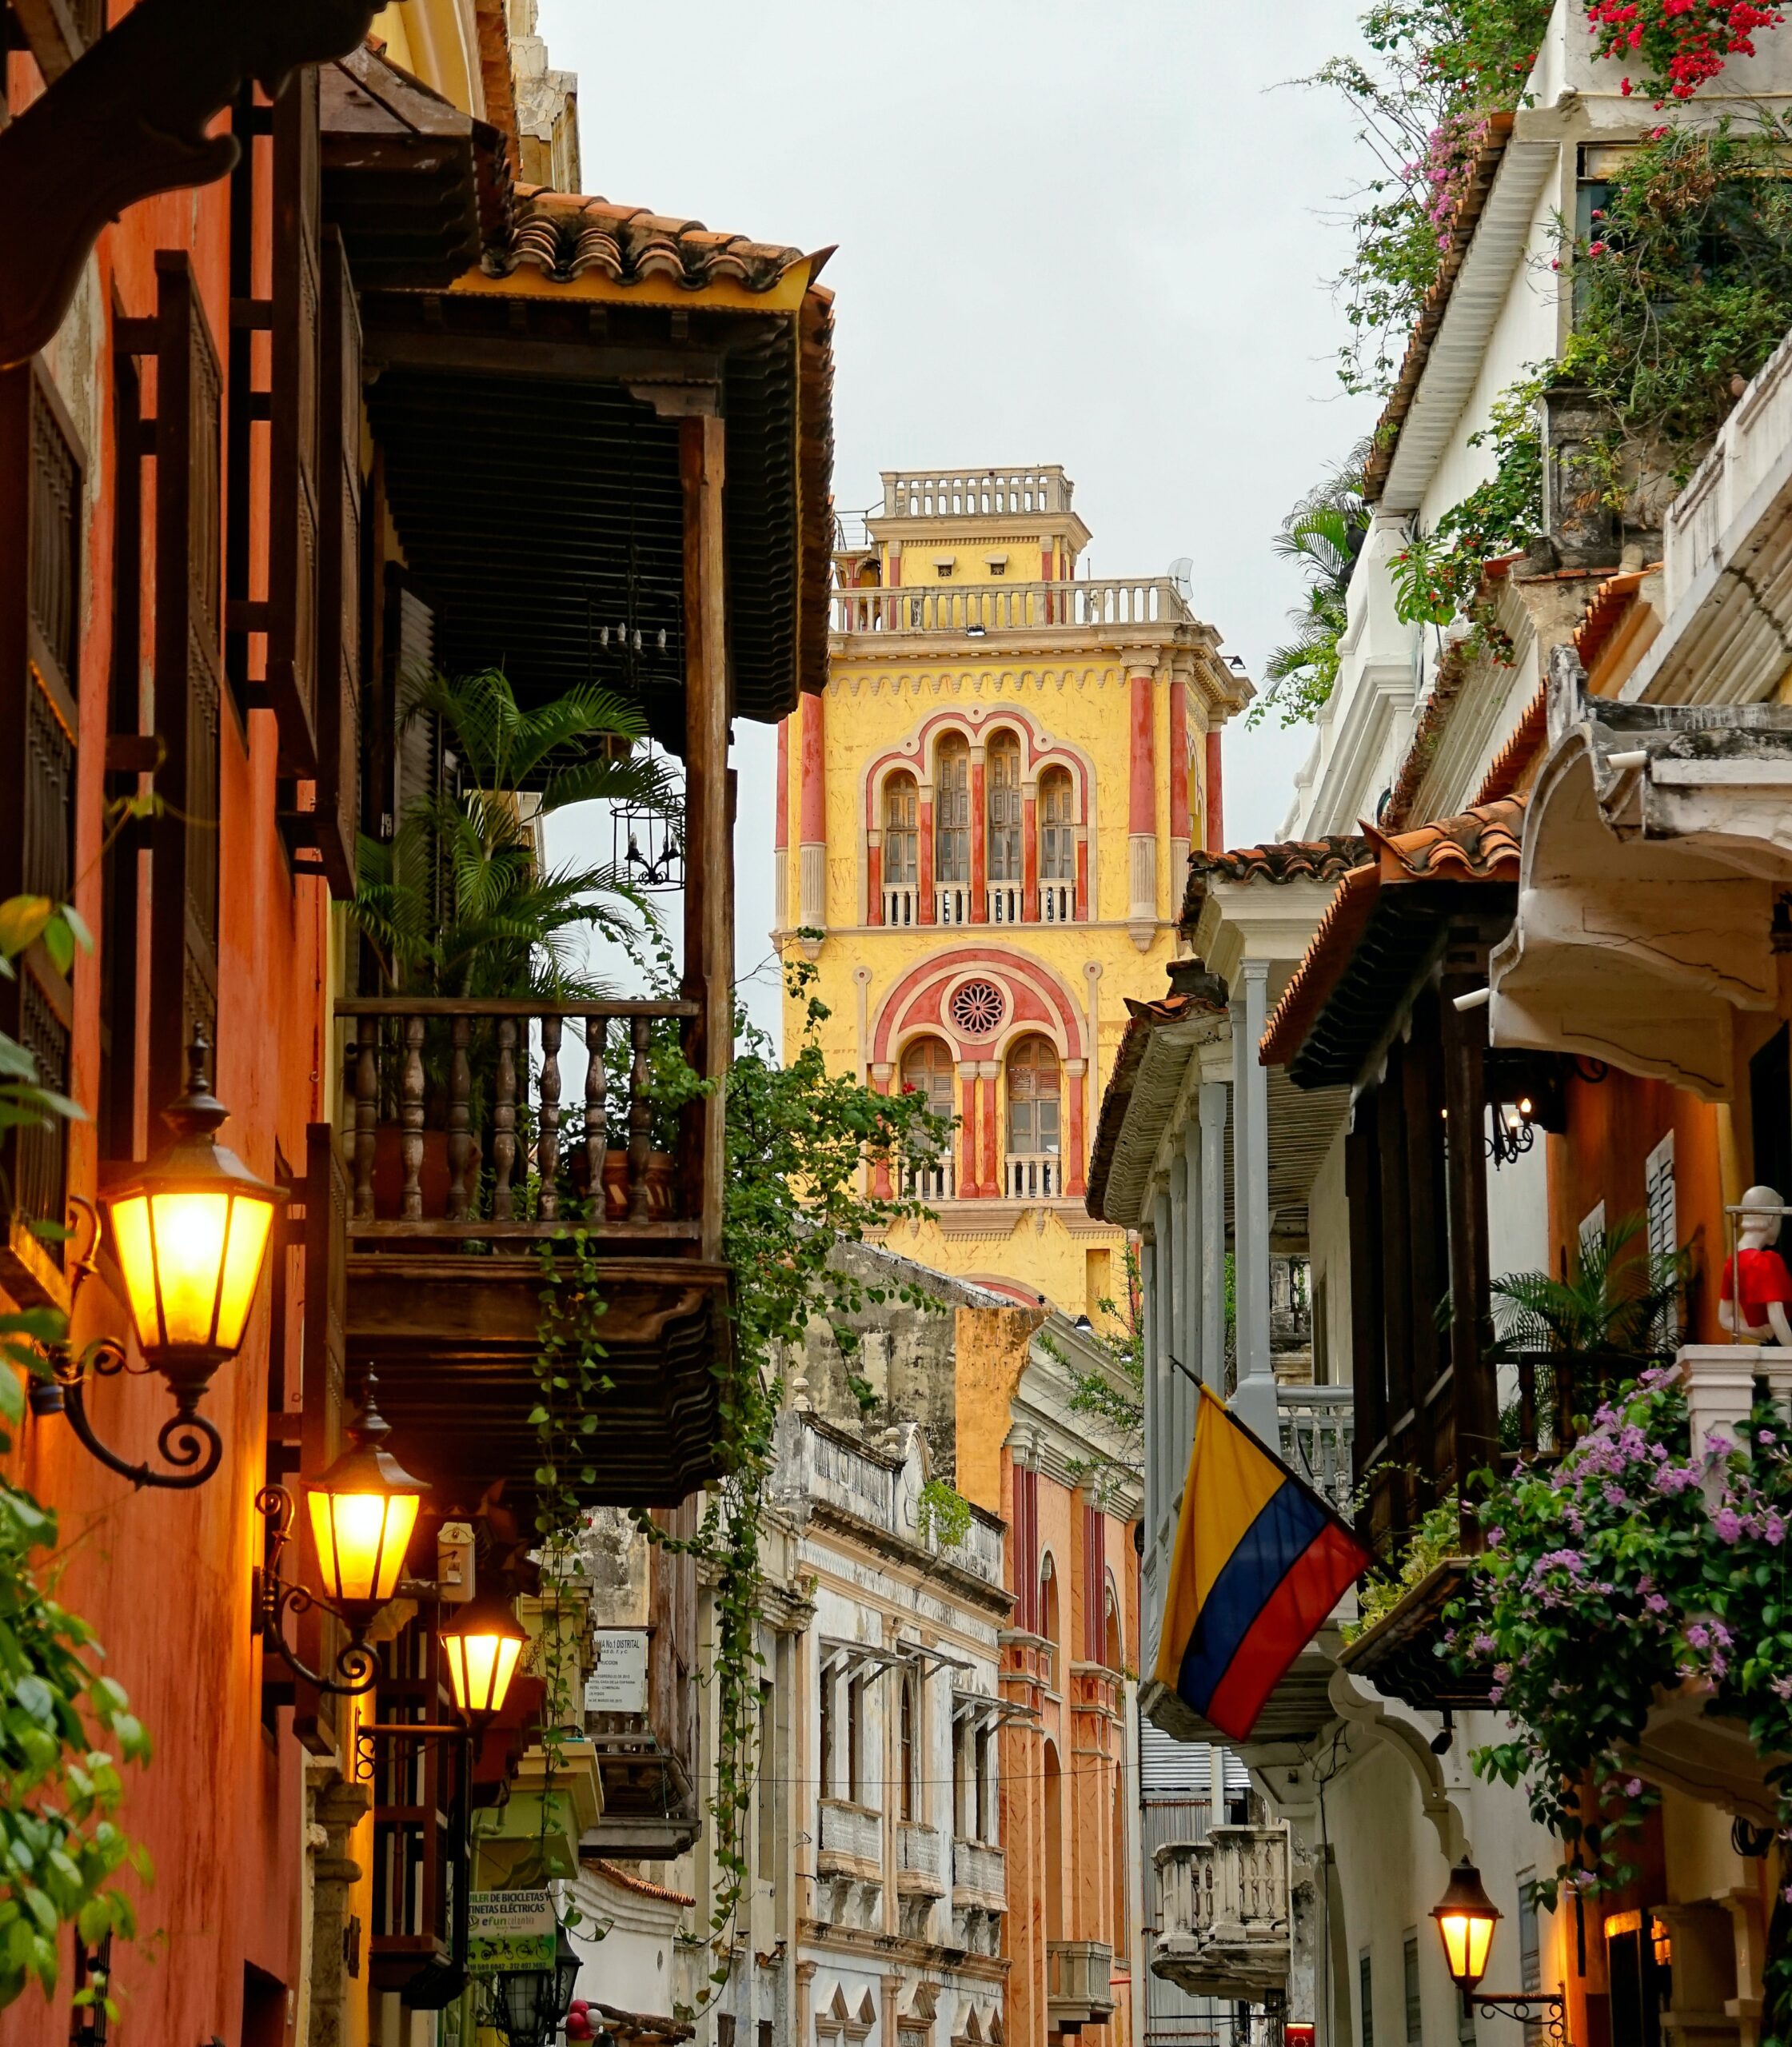 Visit Streets of Cartagena in Colombia for urban life scenes when you travel to South America